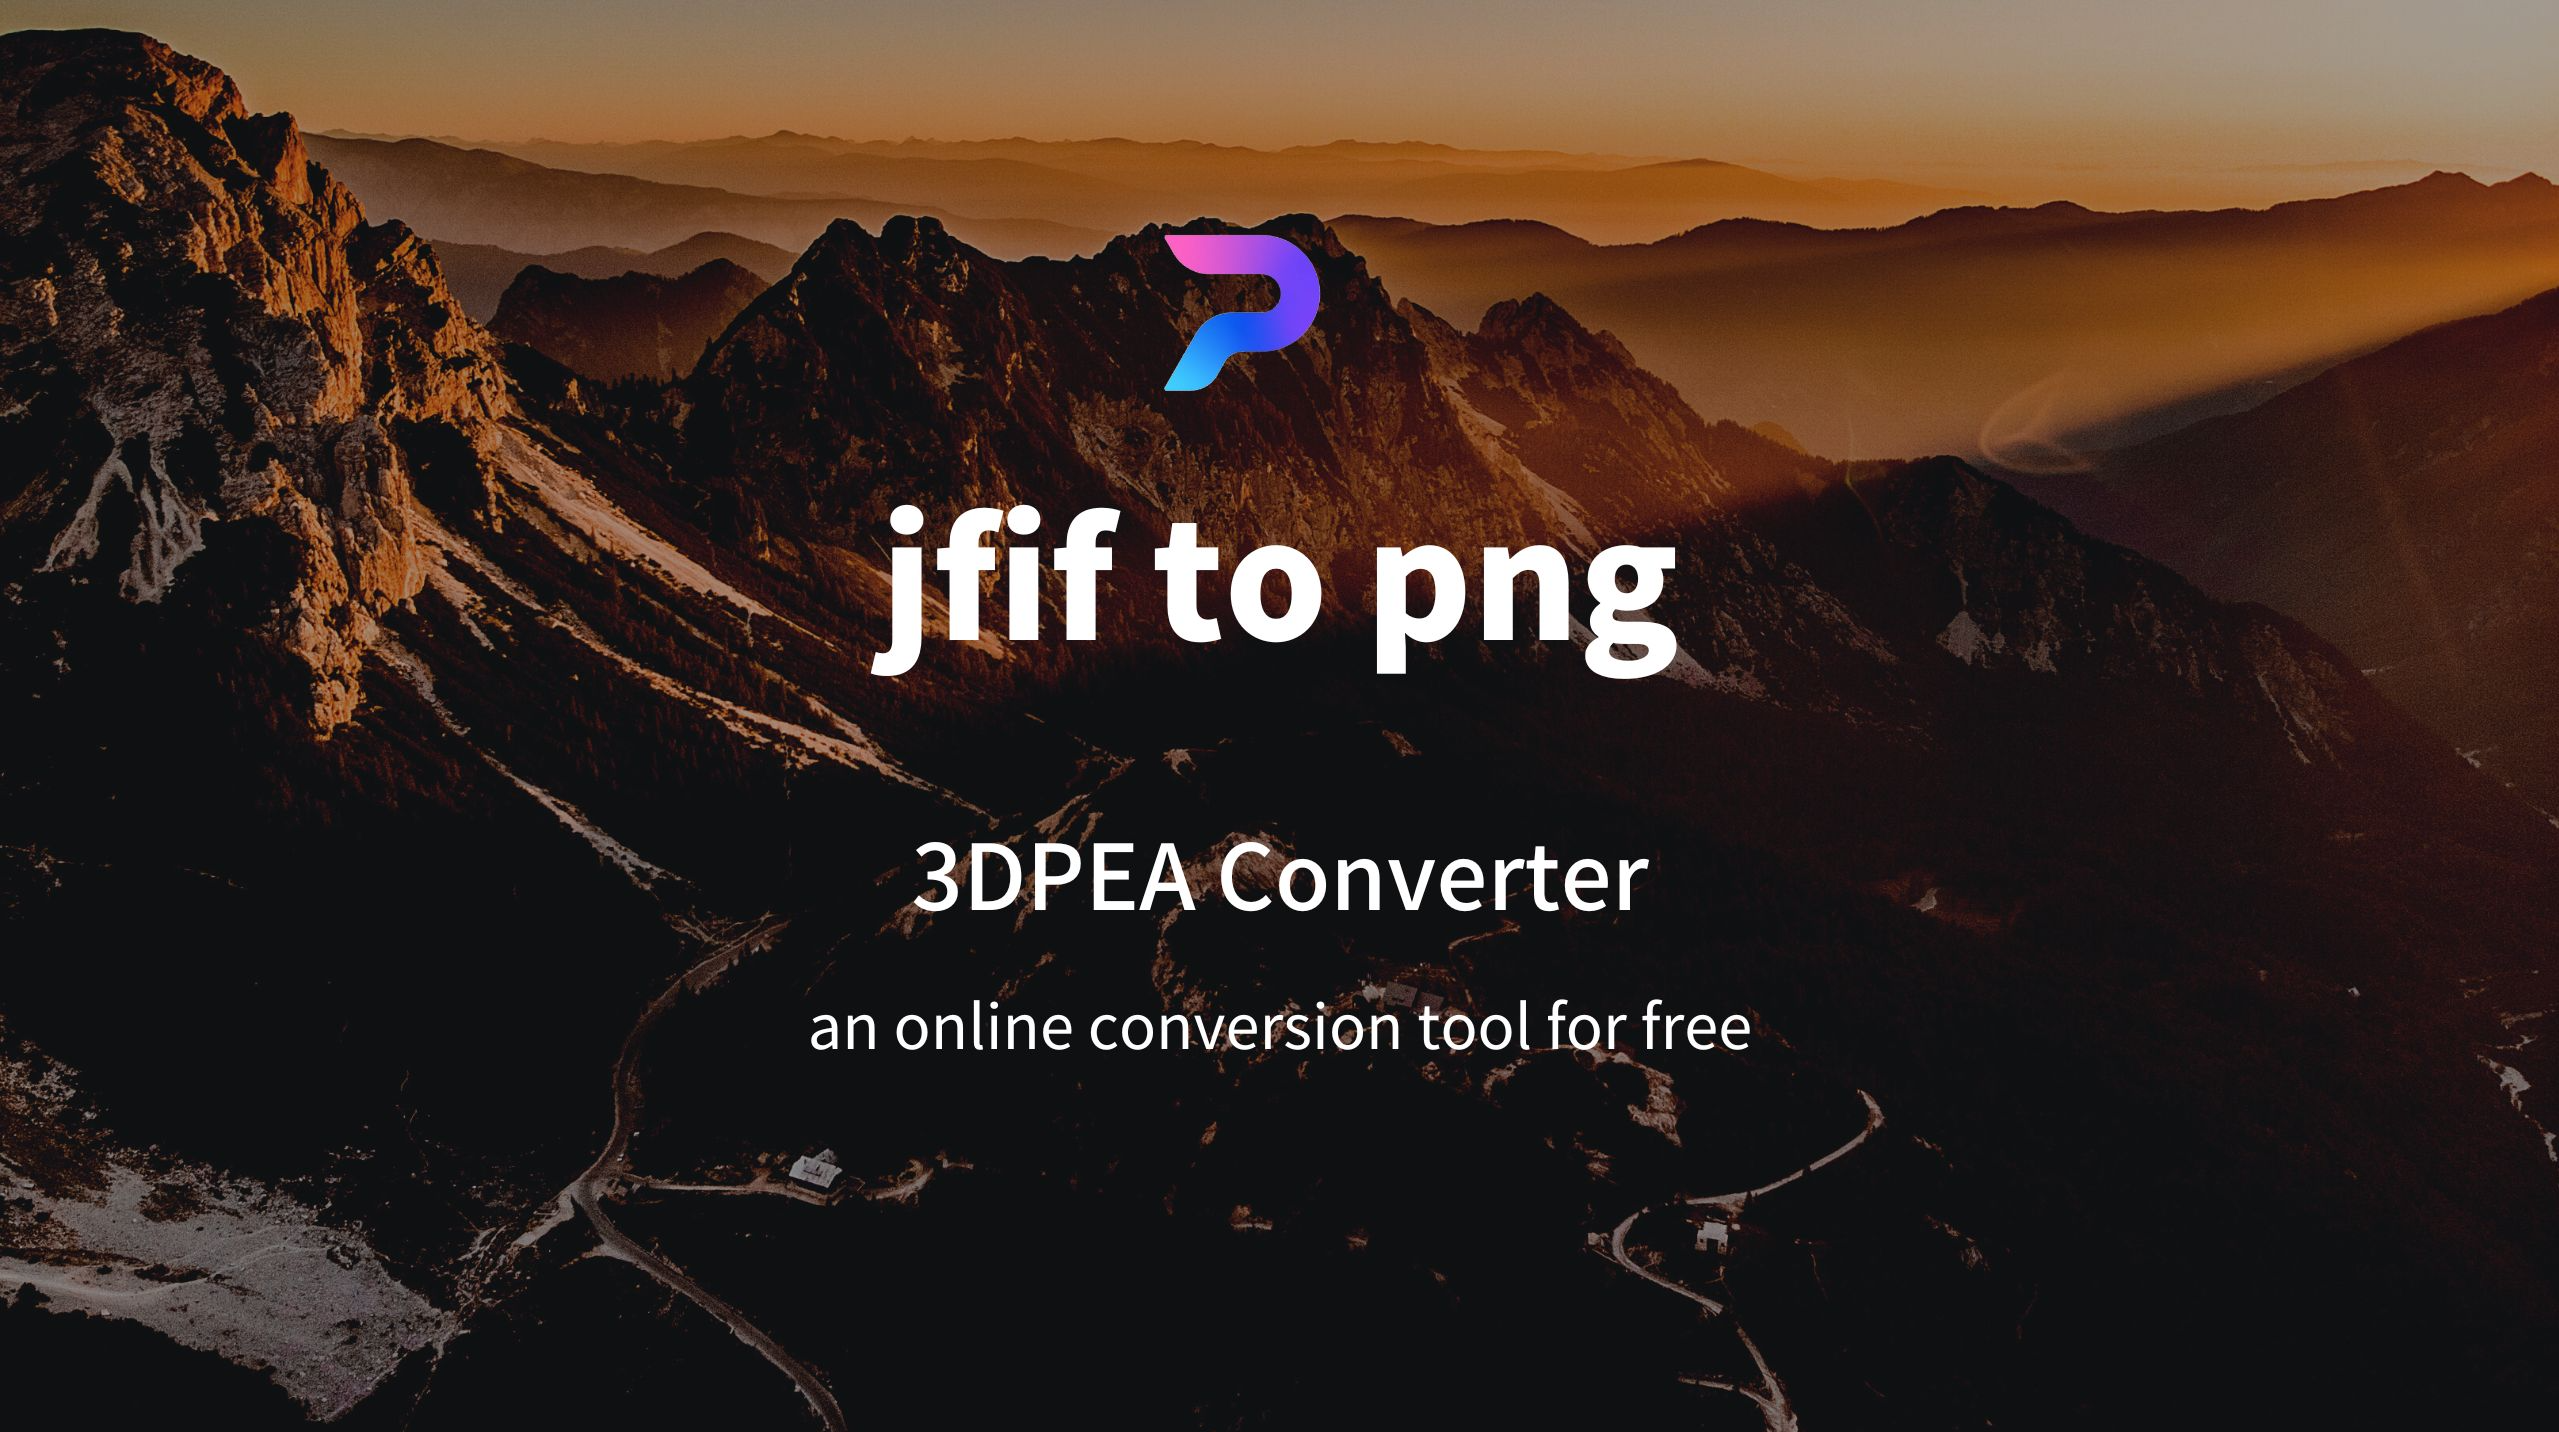 Step by step guide to convert jfif to png